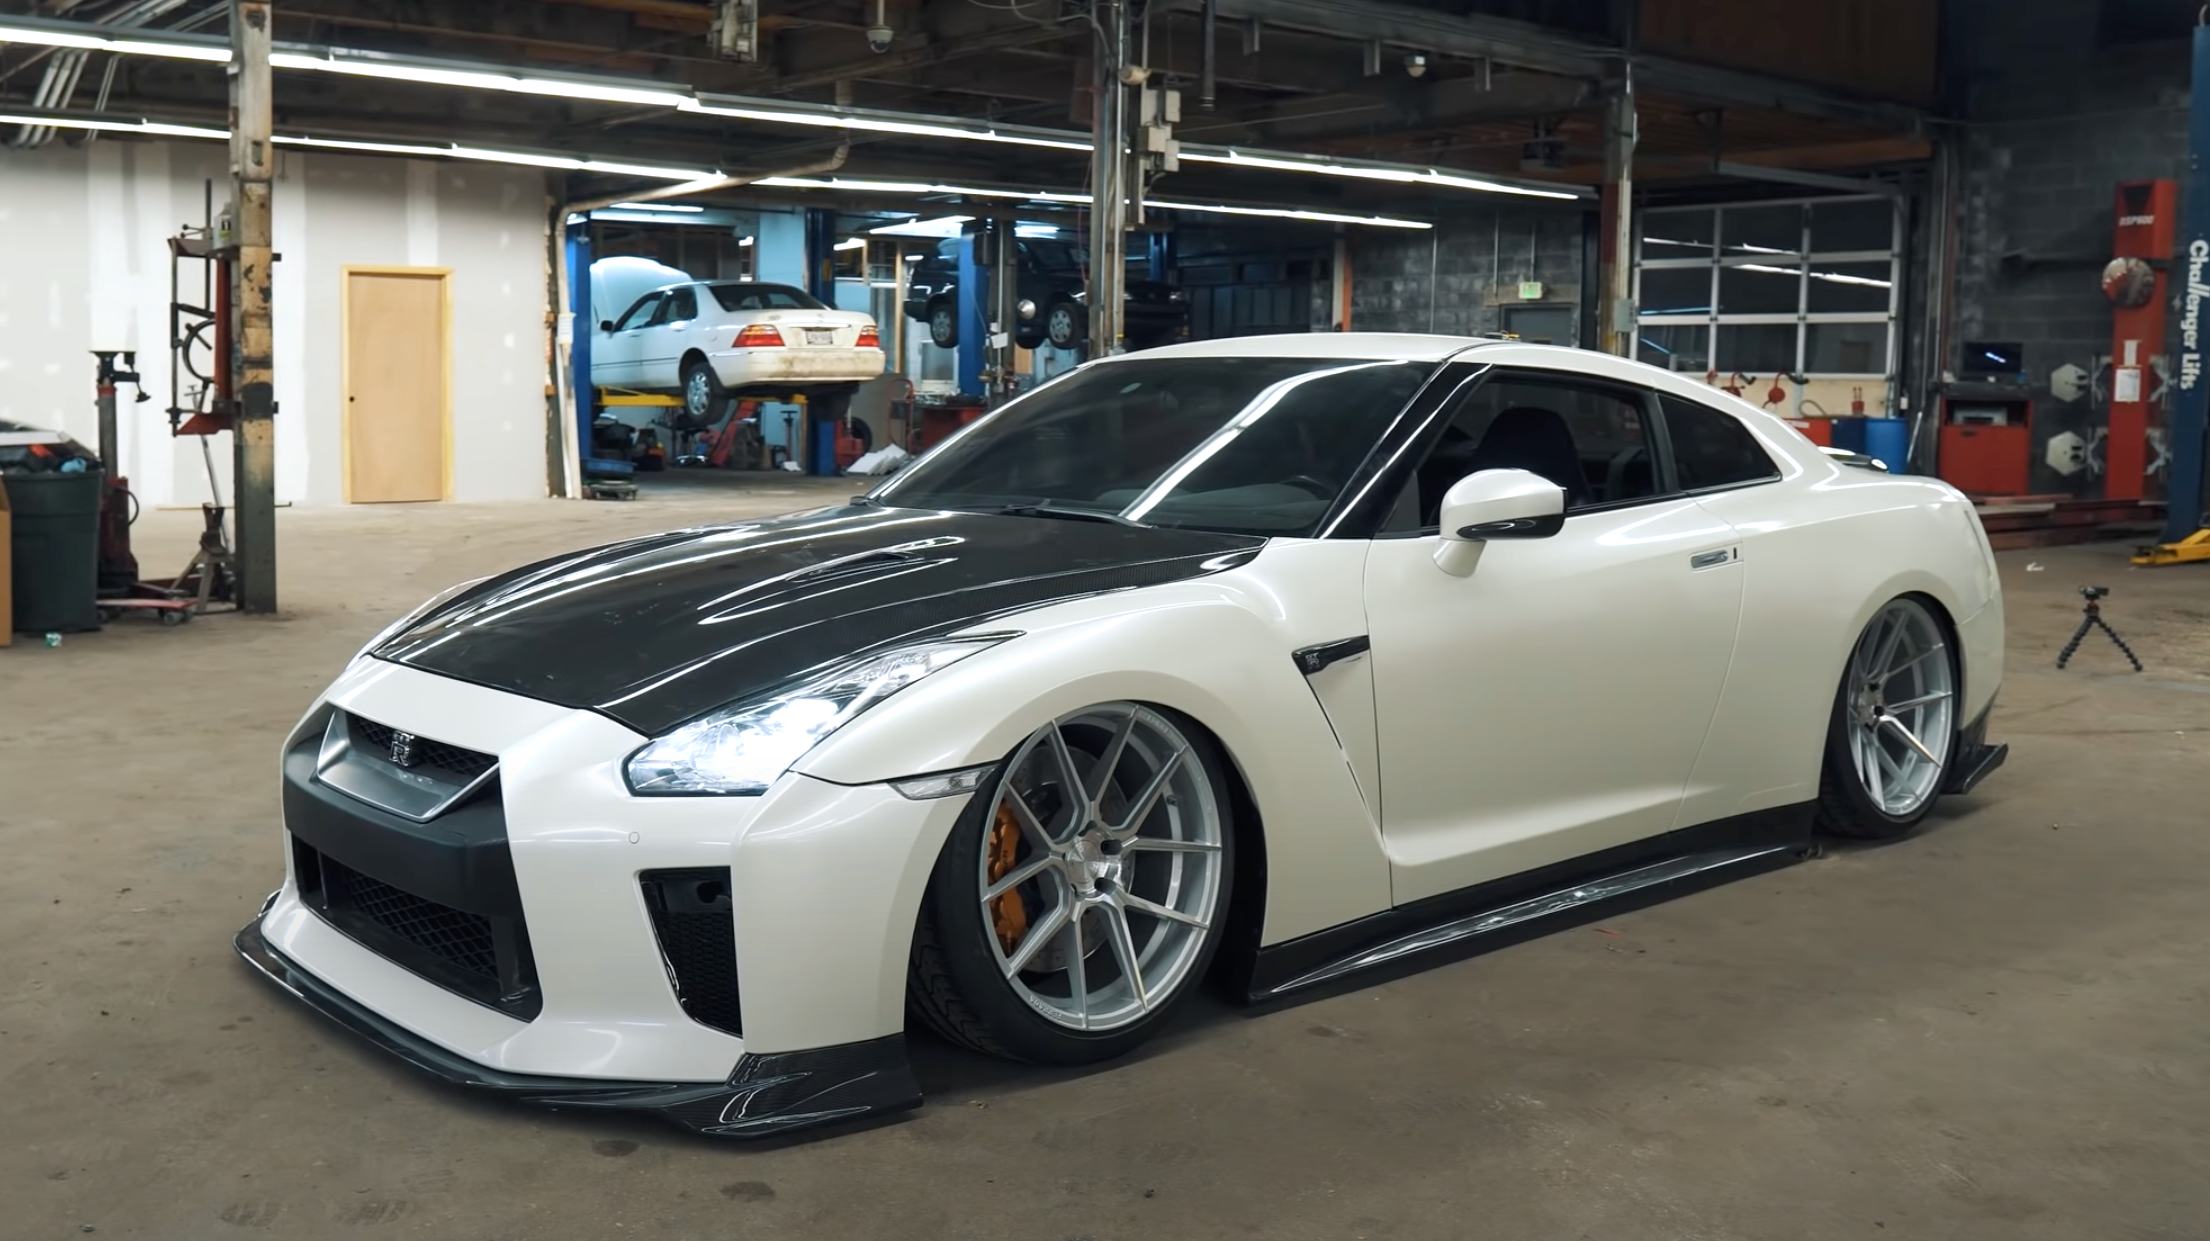 HOW-TO: Nissan GTR Air-Lift Suspension Install